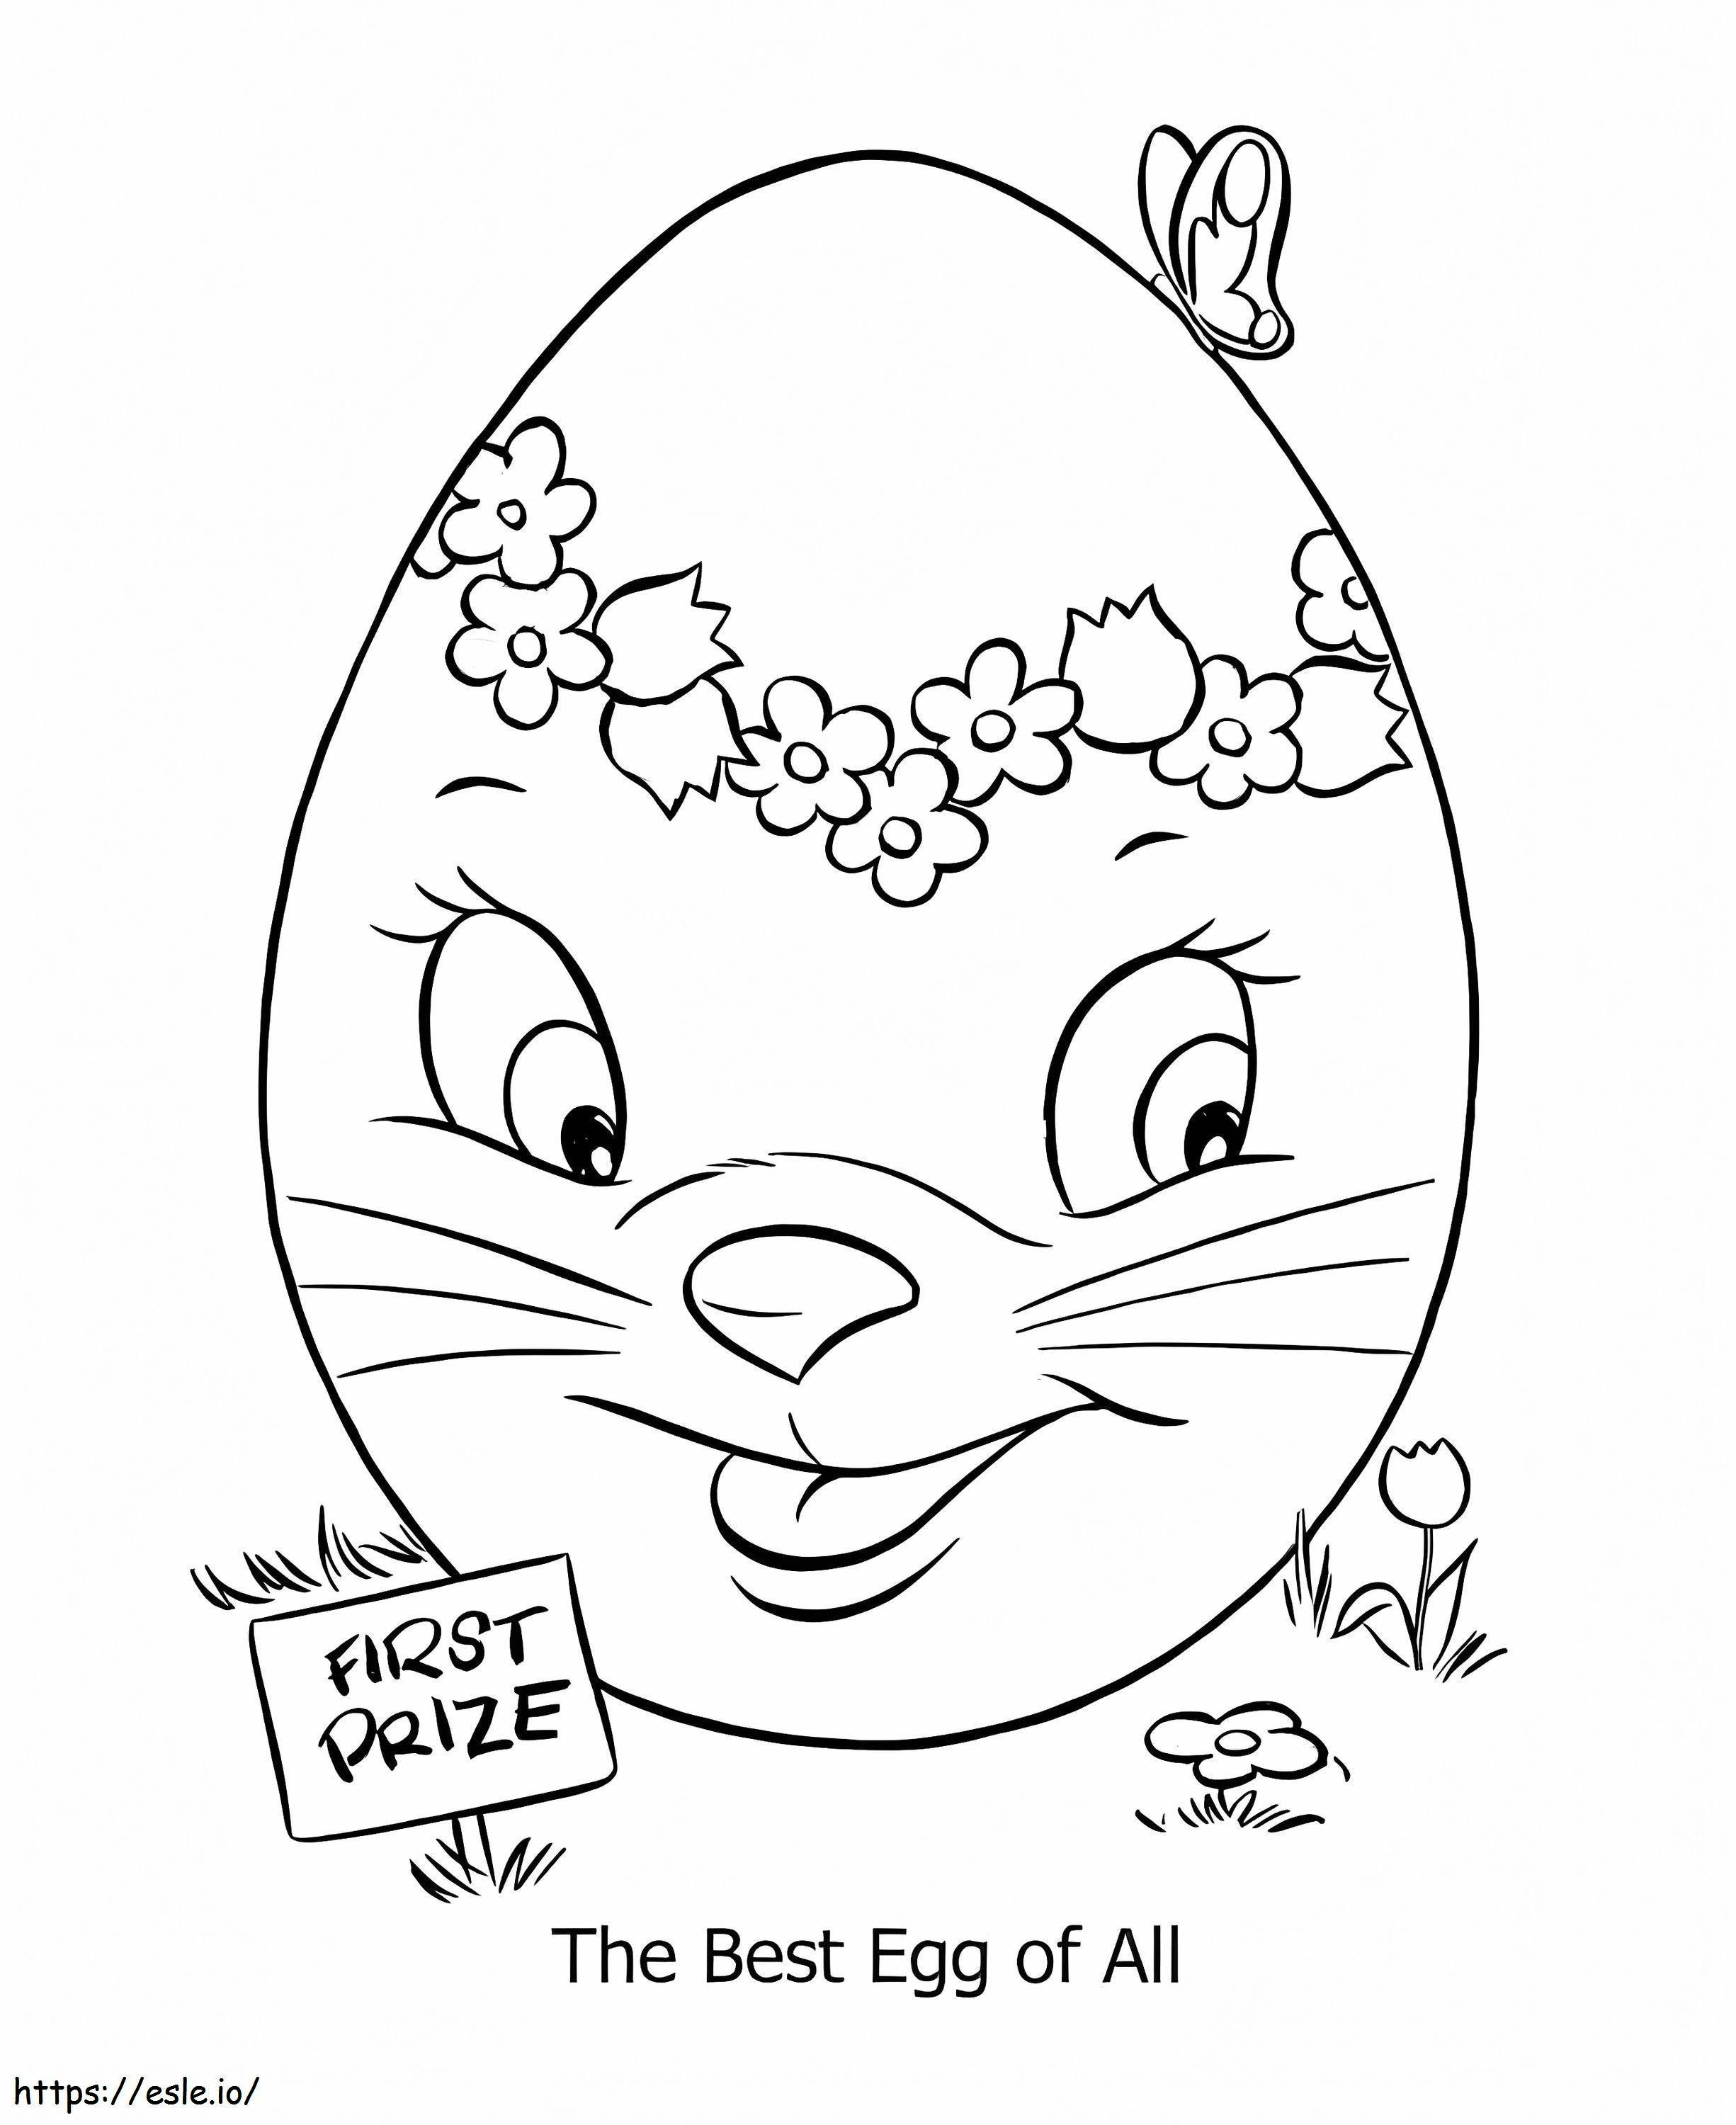 Cartoon Easter Egg coloring page